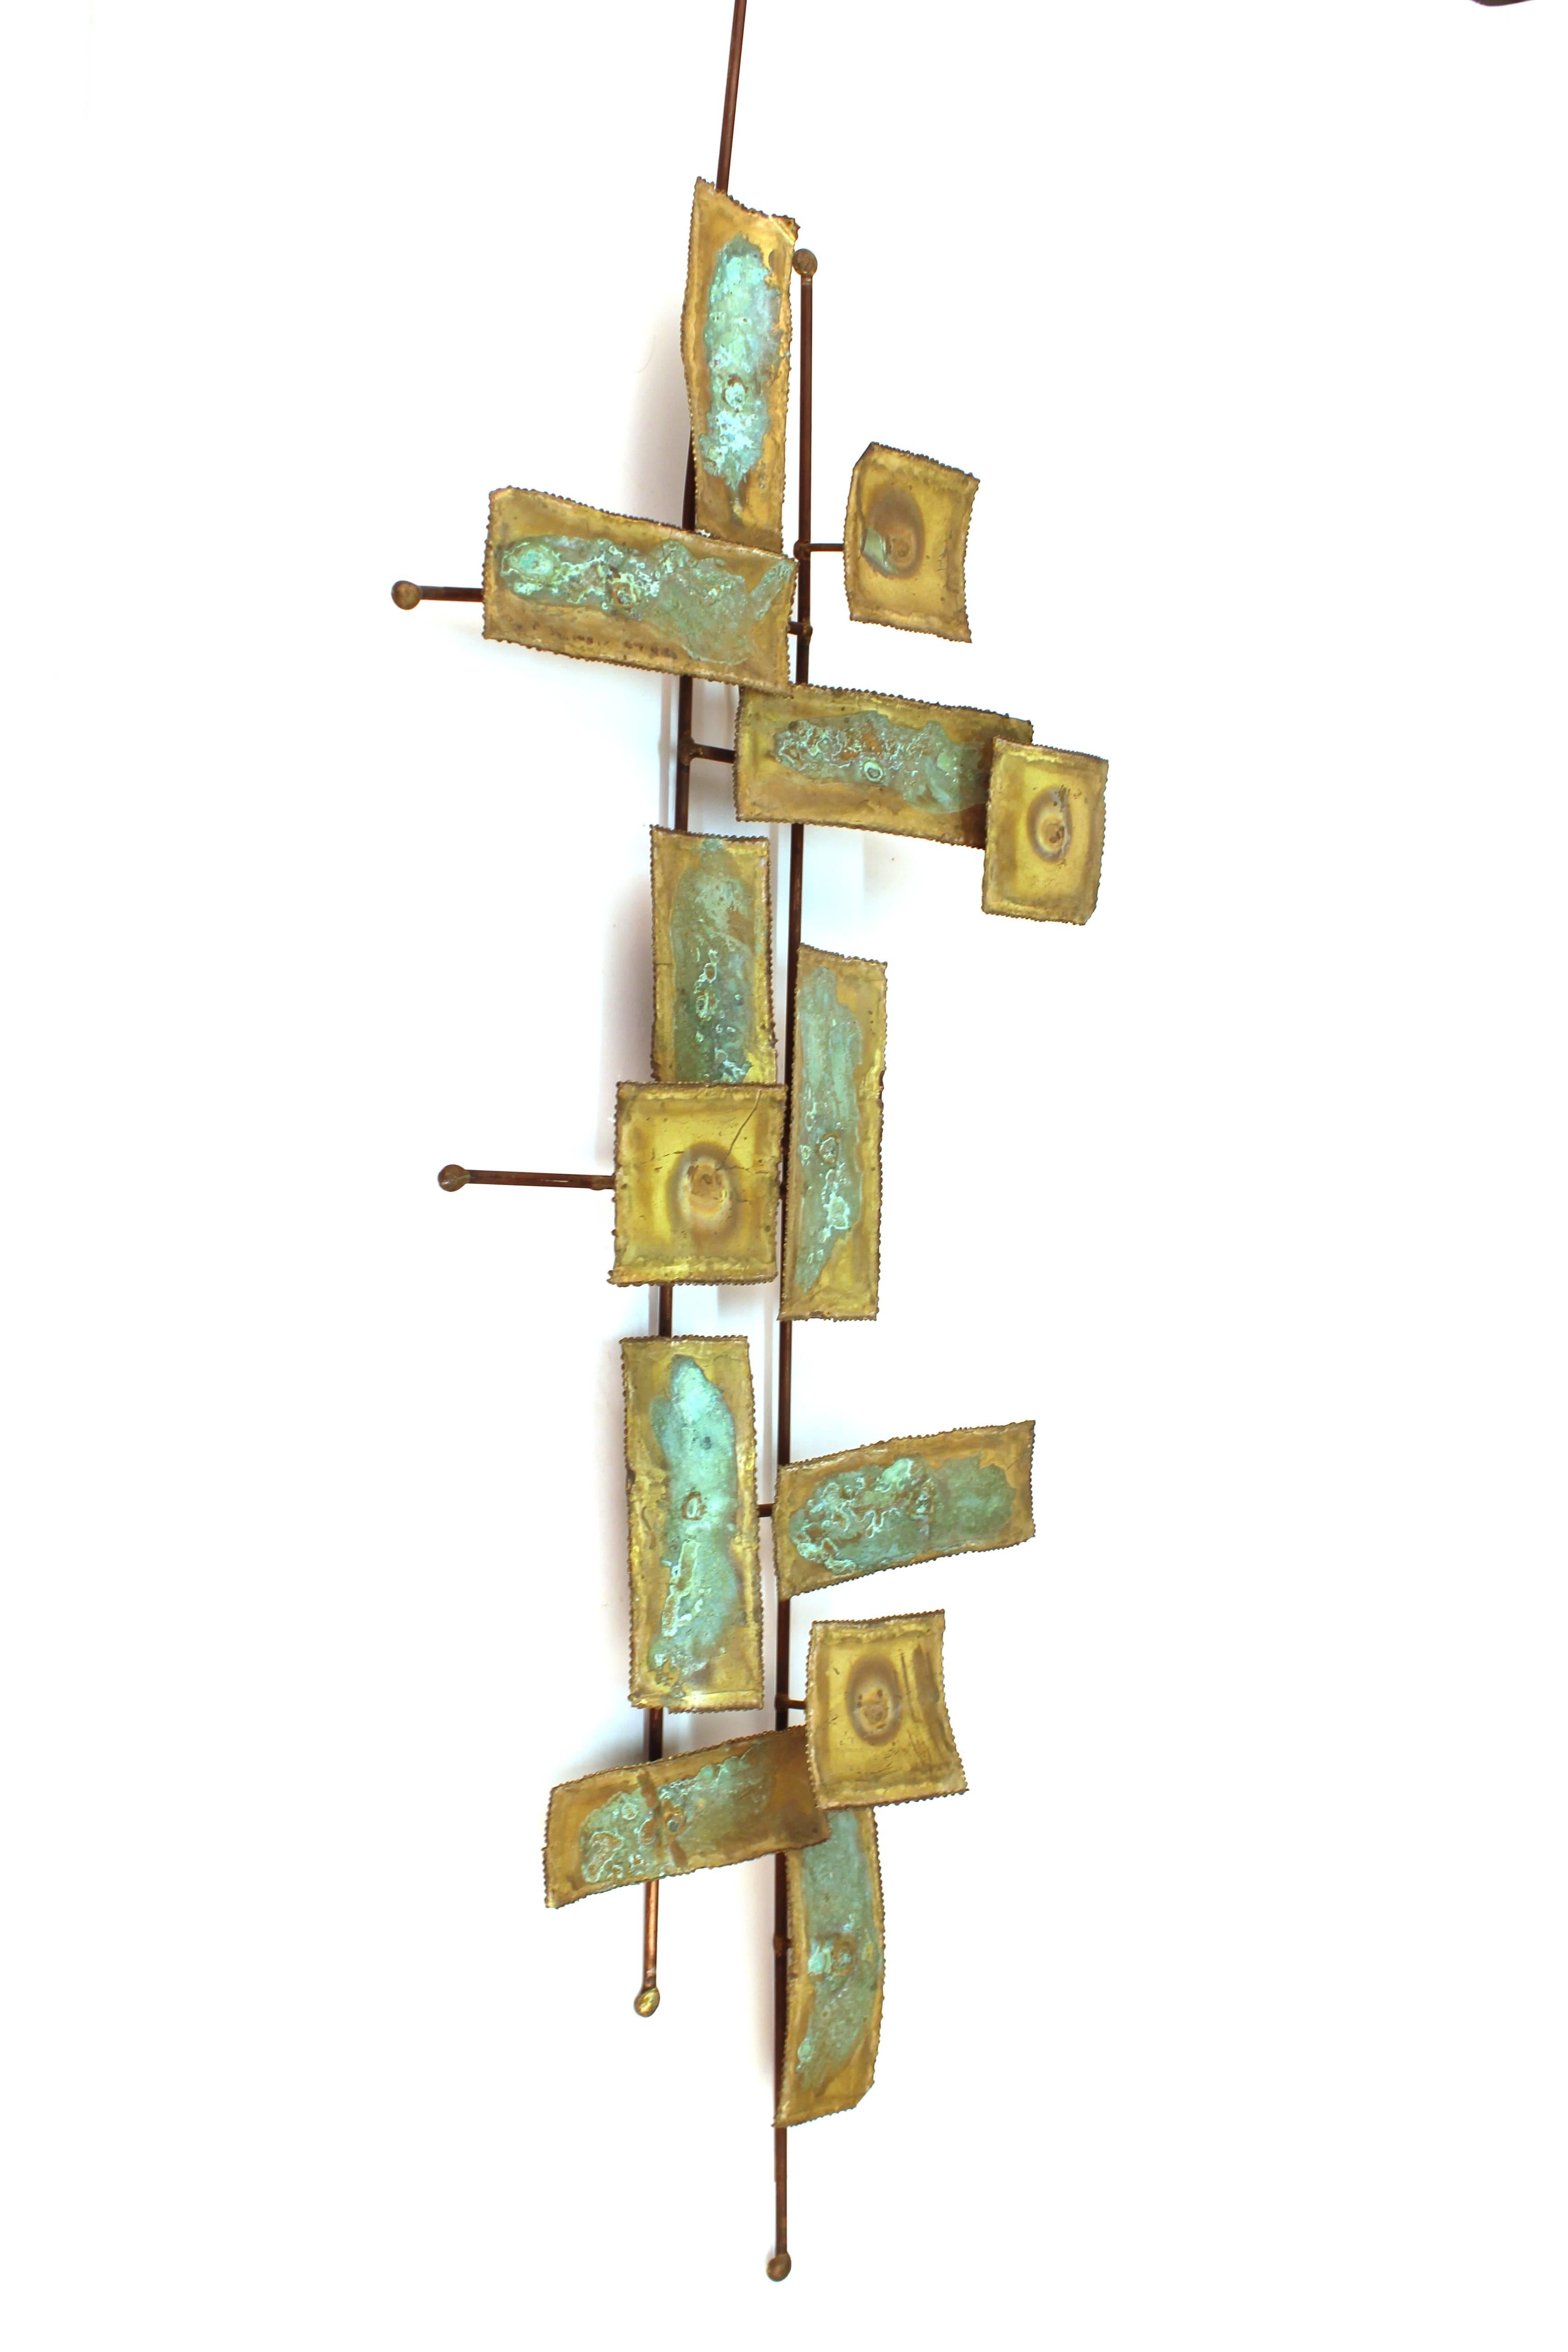 Curtis Jere style Mid-Century Modern metal wall sculpture with rectangular shapes assembled in geometric pattern. In great vintage condition.